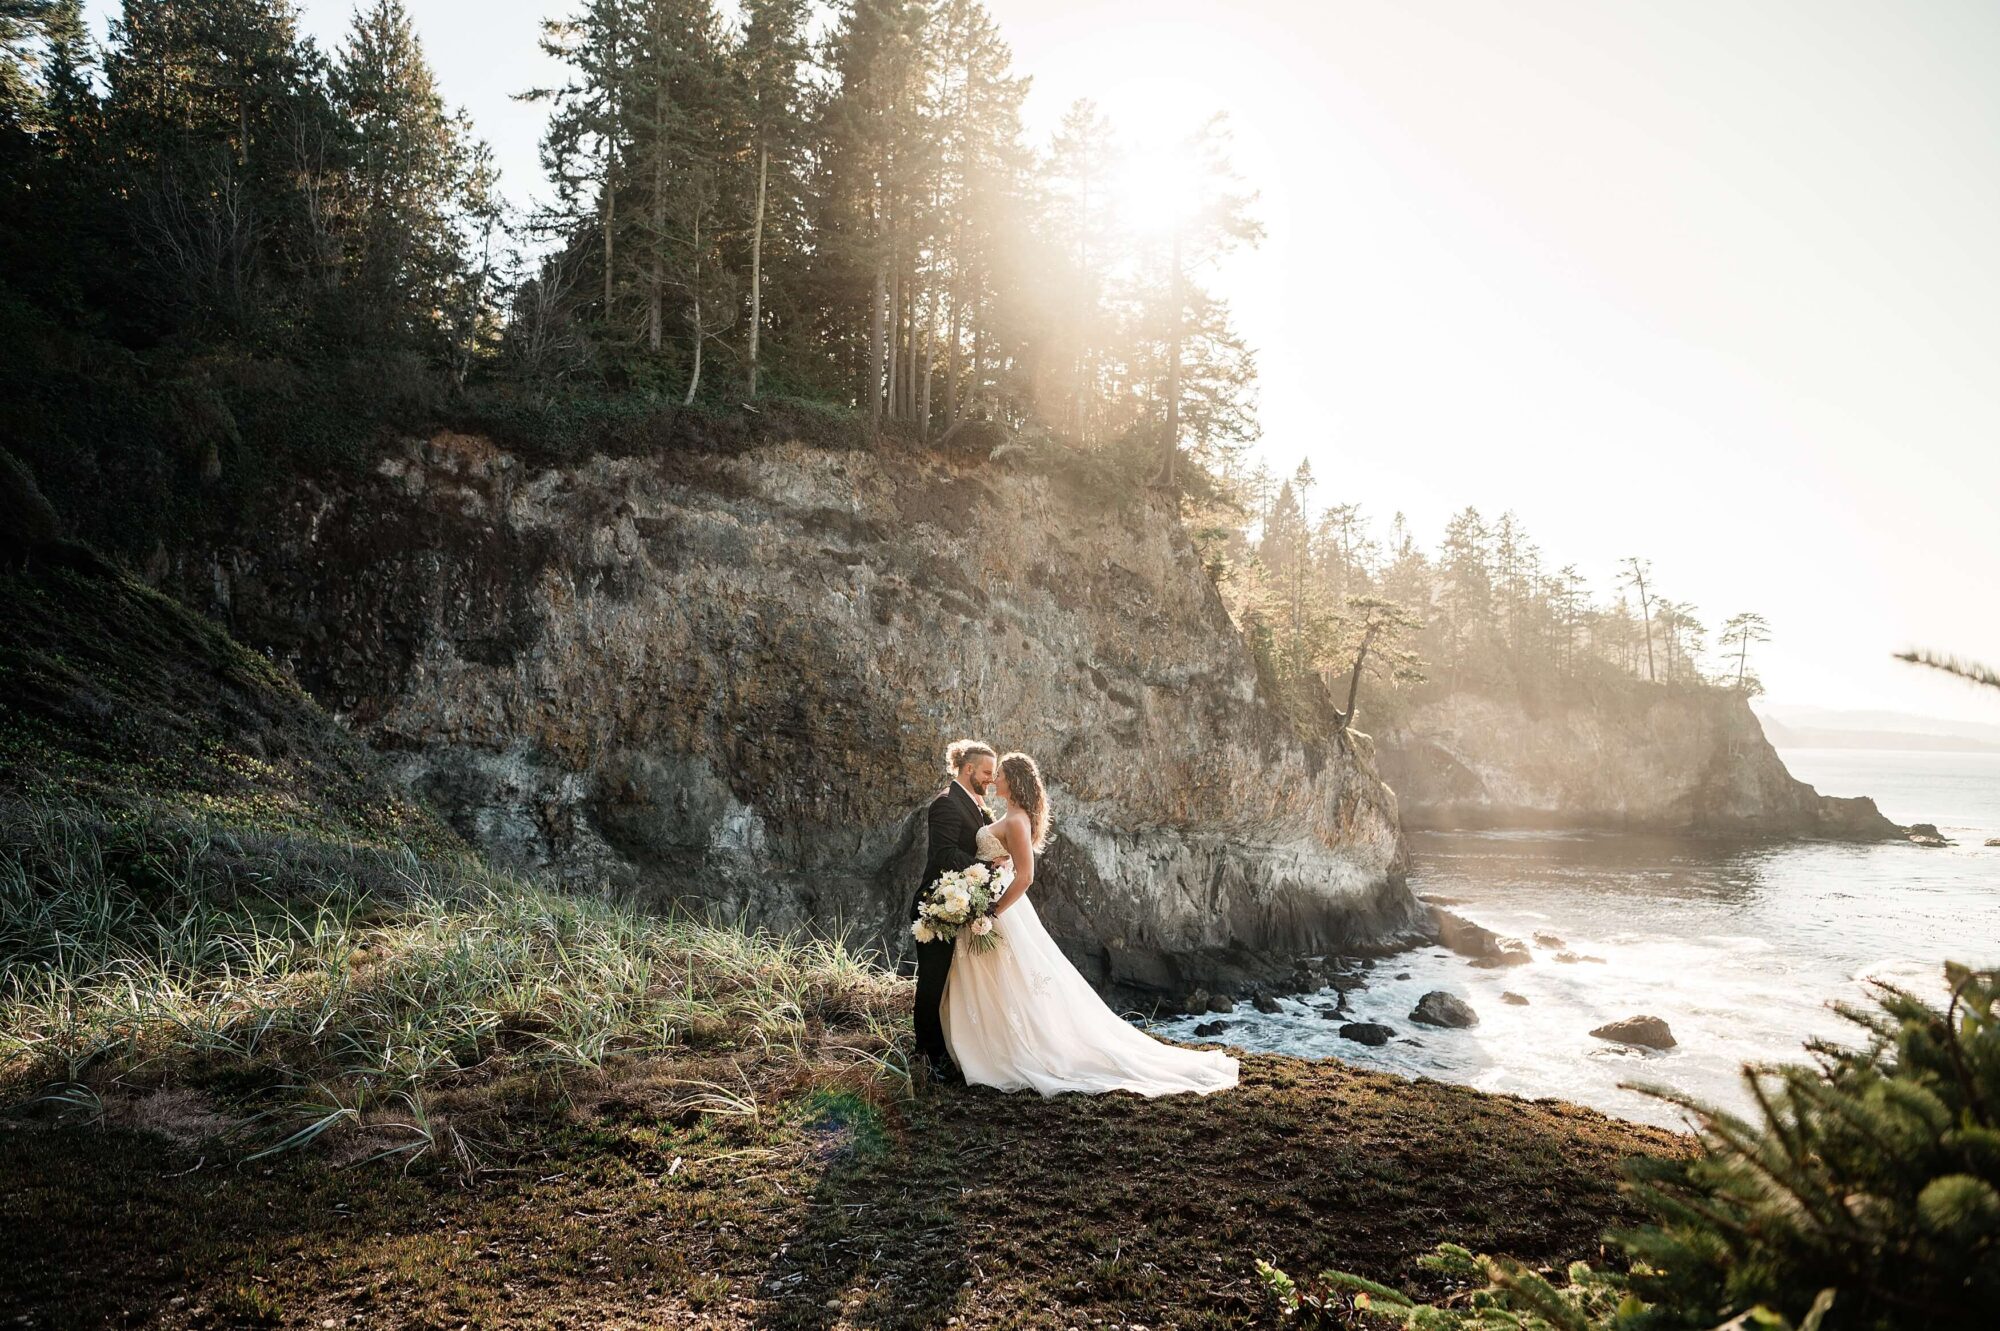 Bride and groom eloping at sunset on a cliff on the Washington Coast